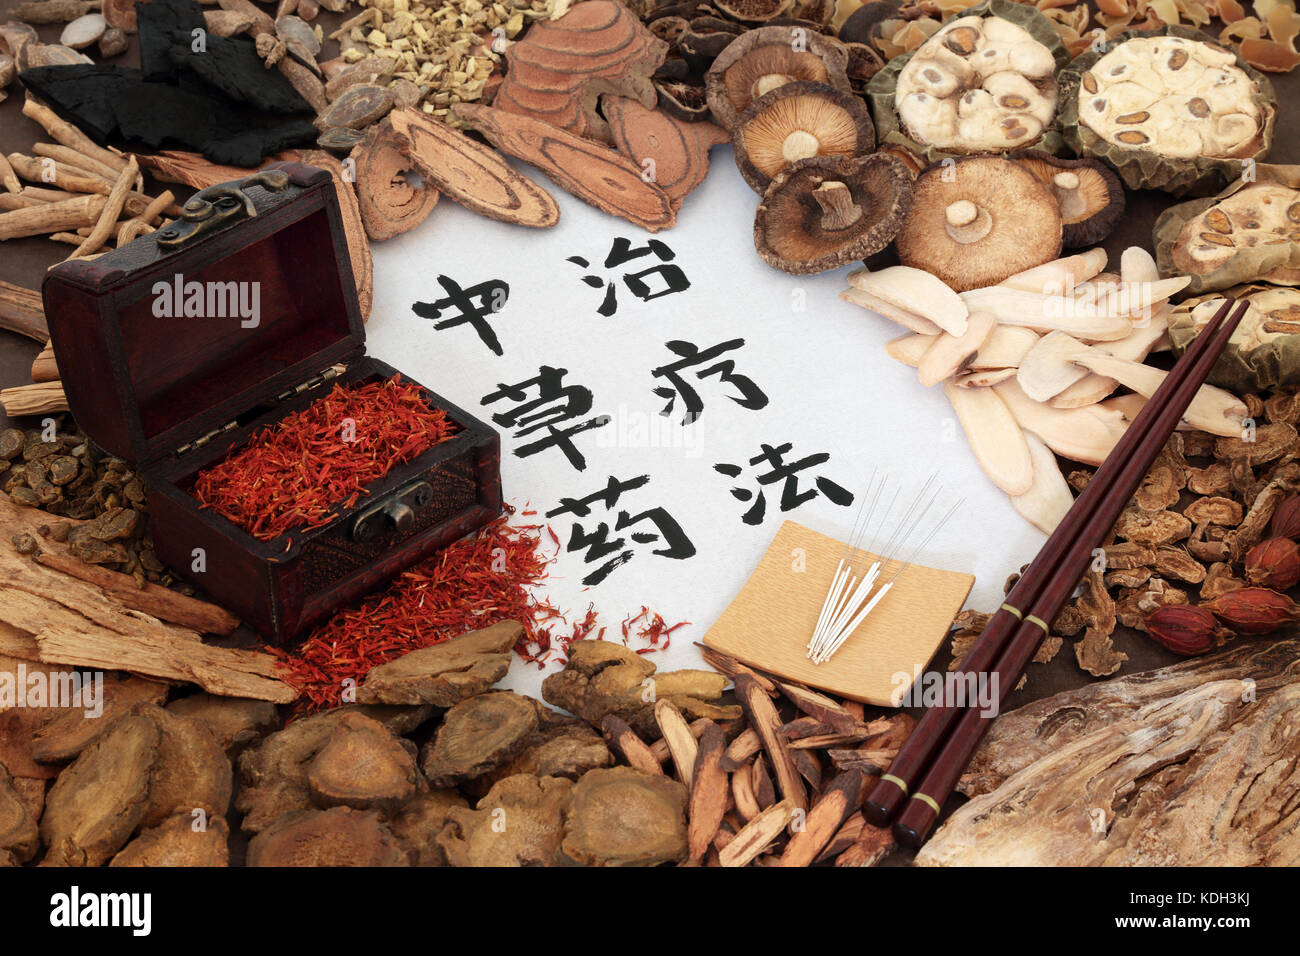 Chinese herbal medicine with acupuncture needles and a selection of herbs with safflower in a wooden ox and calligraphy script on rice paper. Stock Photo